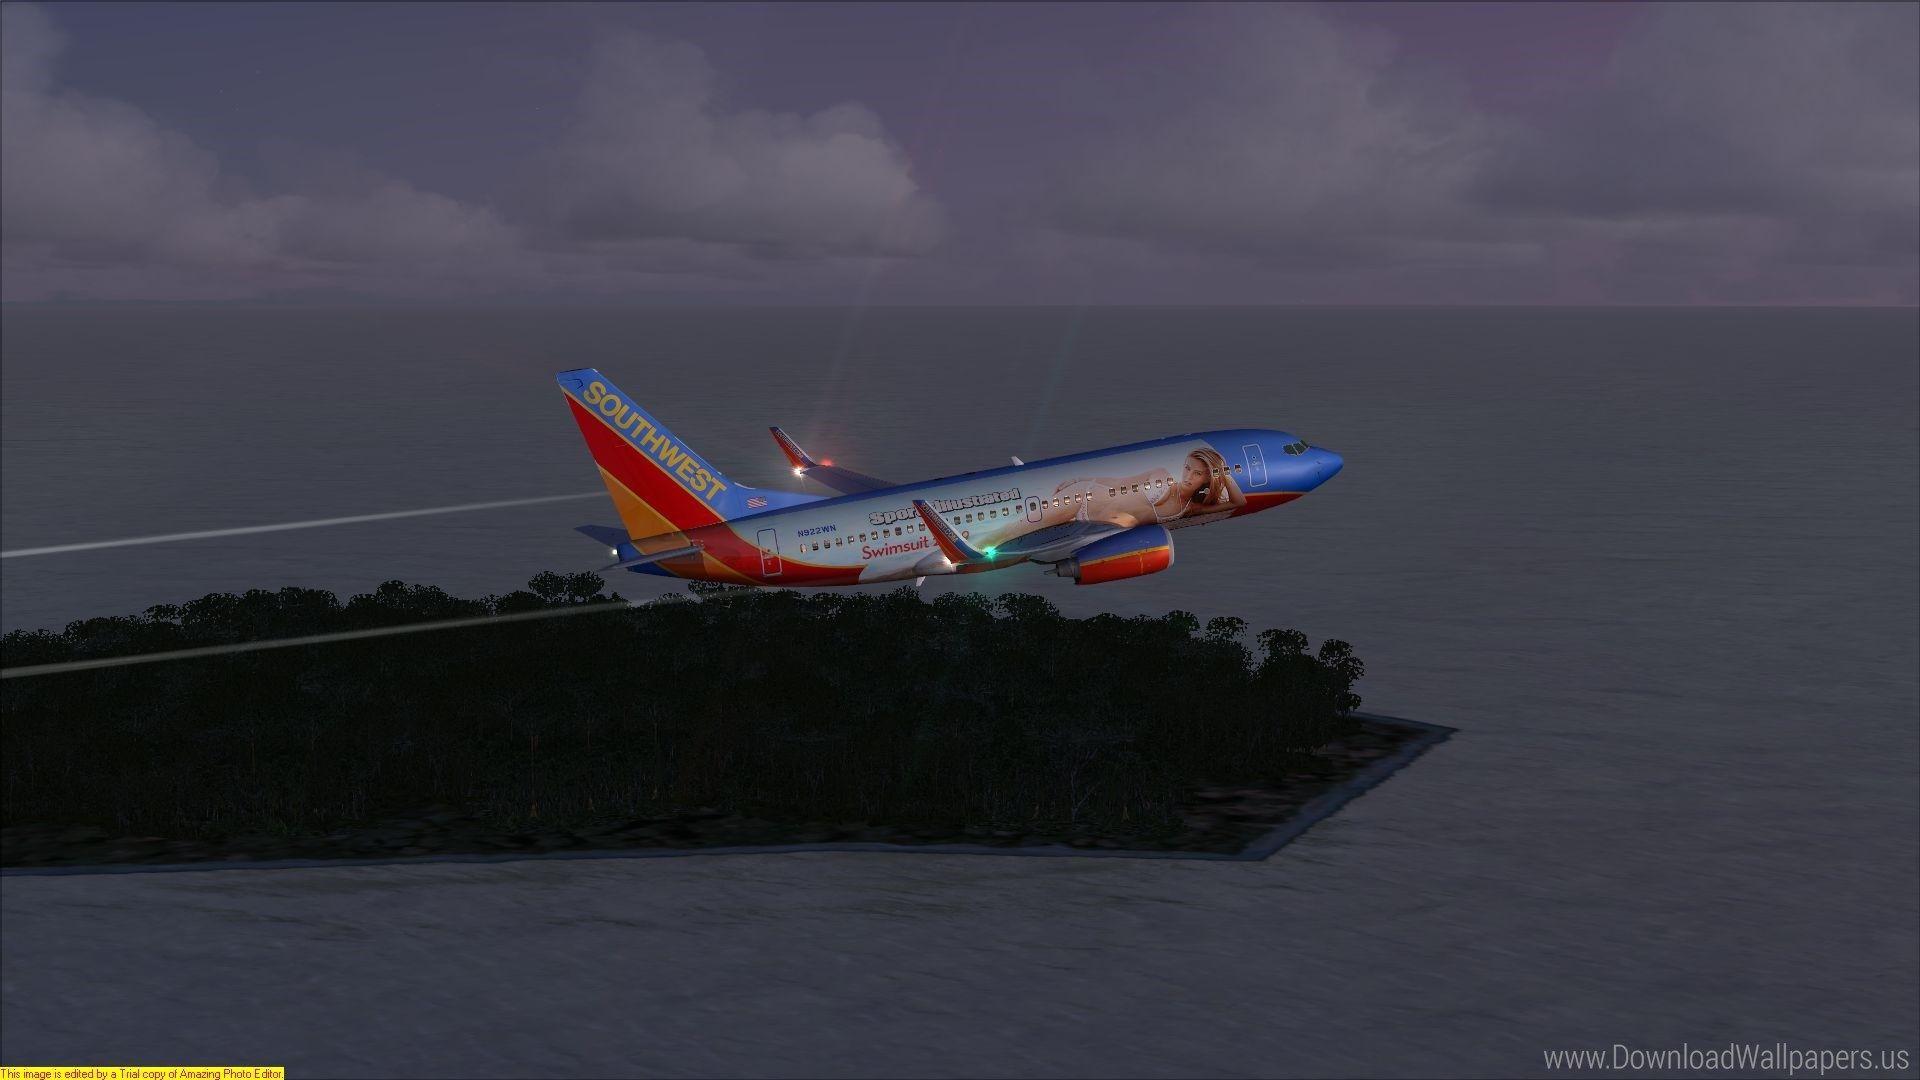 Southwest Airlines Wallpaper